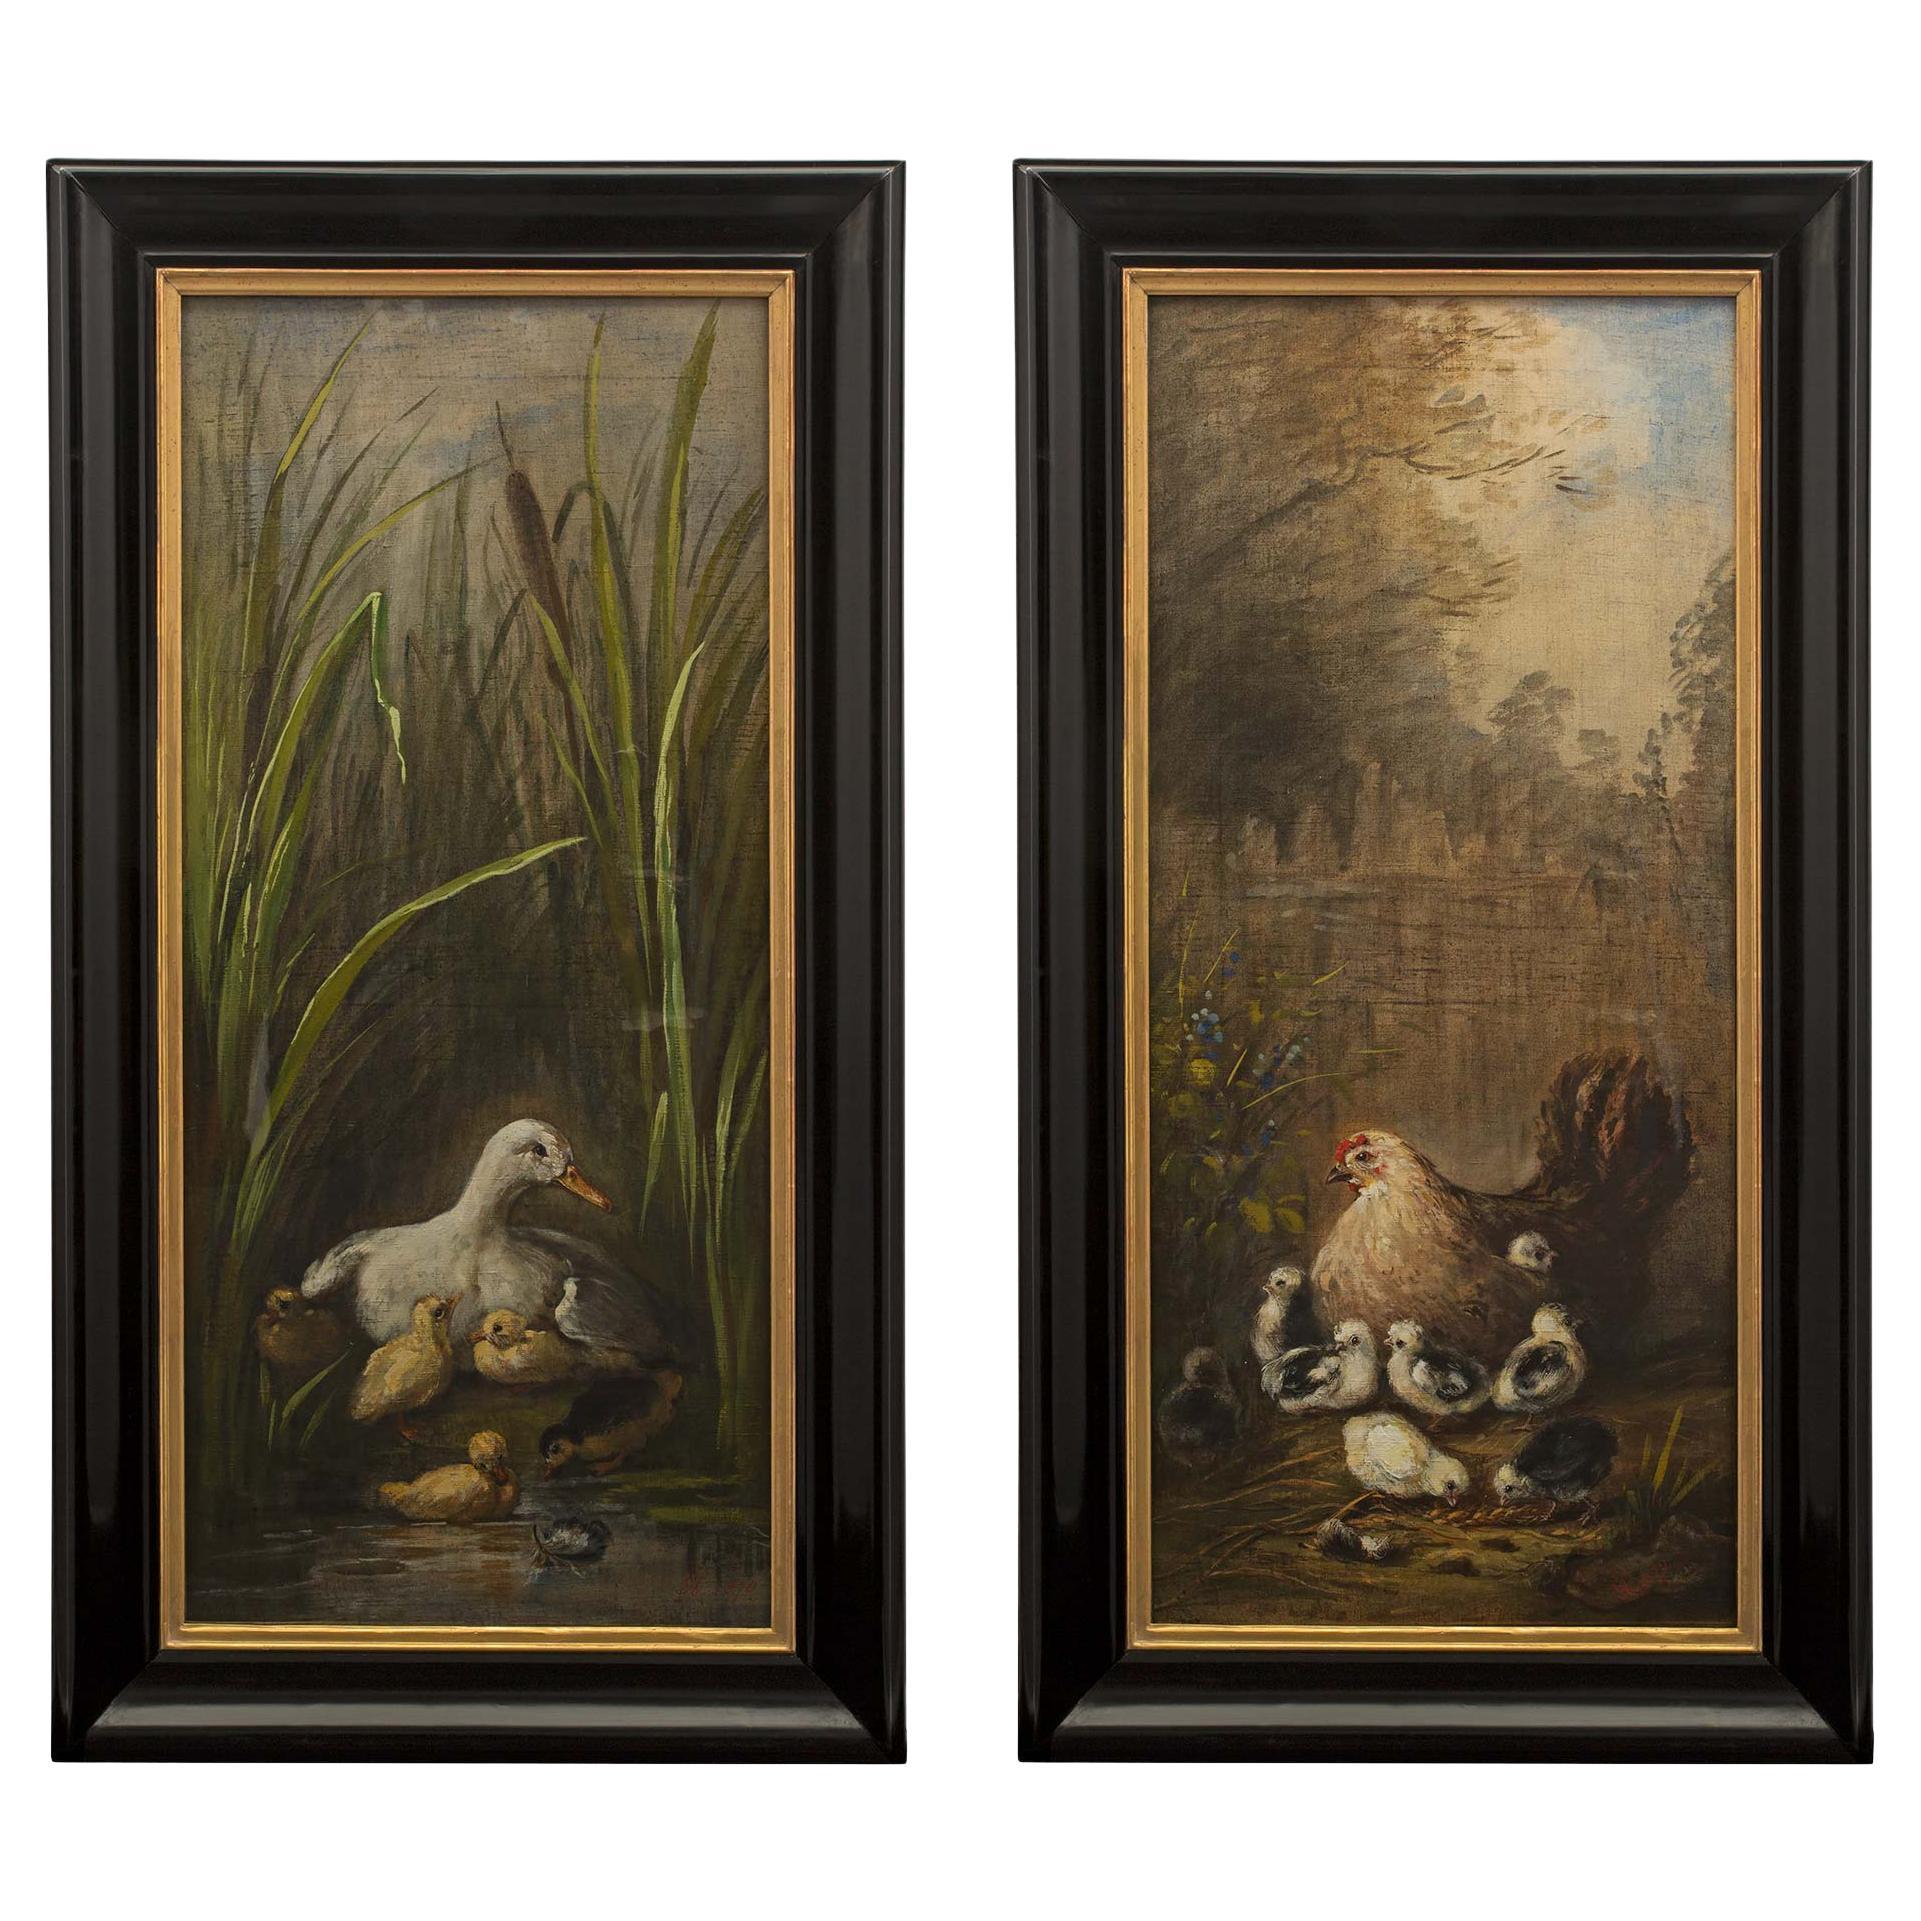 Pair of French Mid-19th Century Napoleon III Period Oil on Canvas